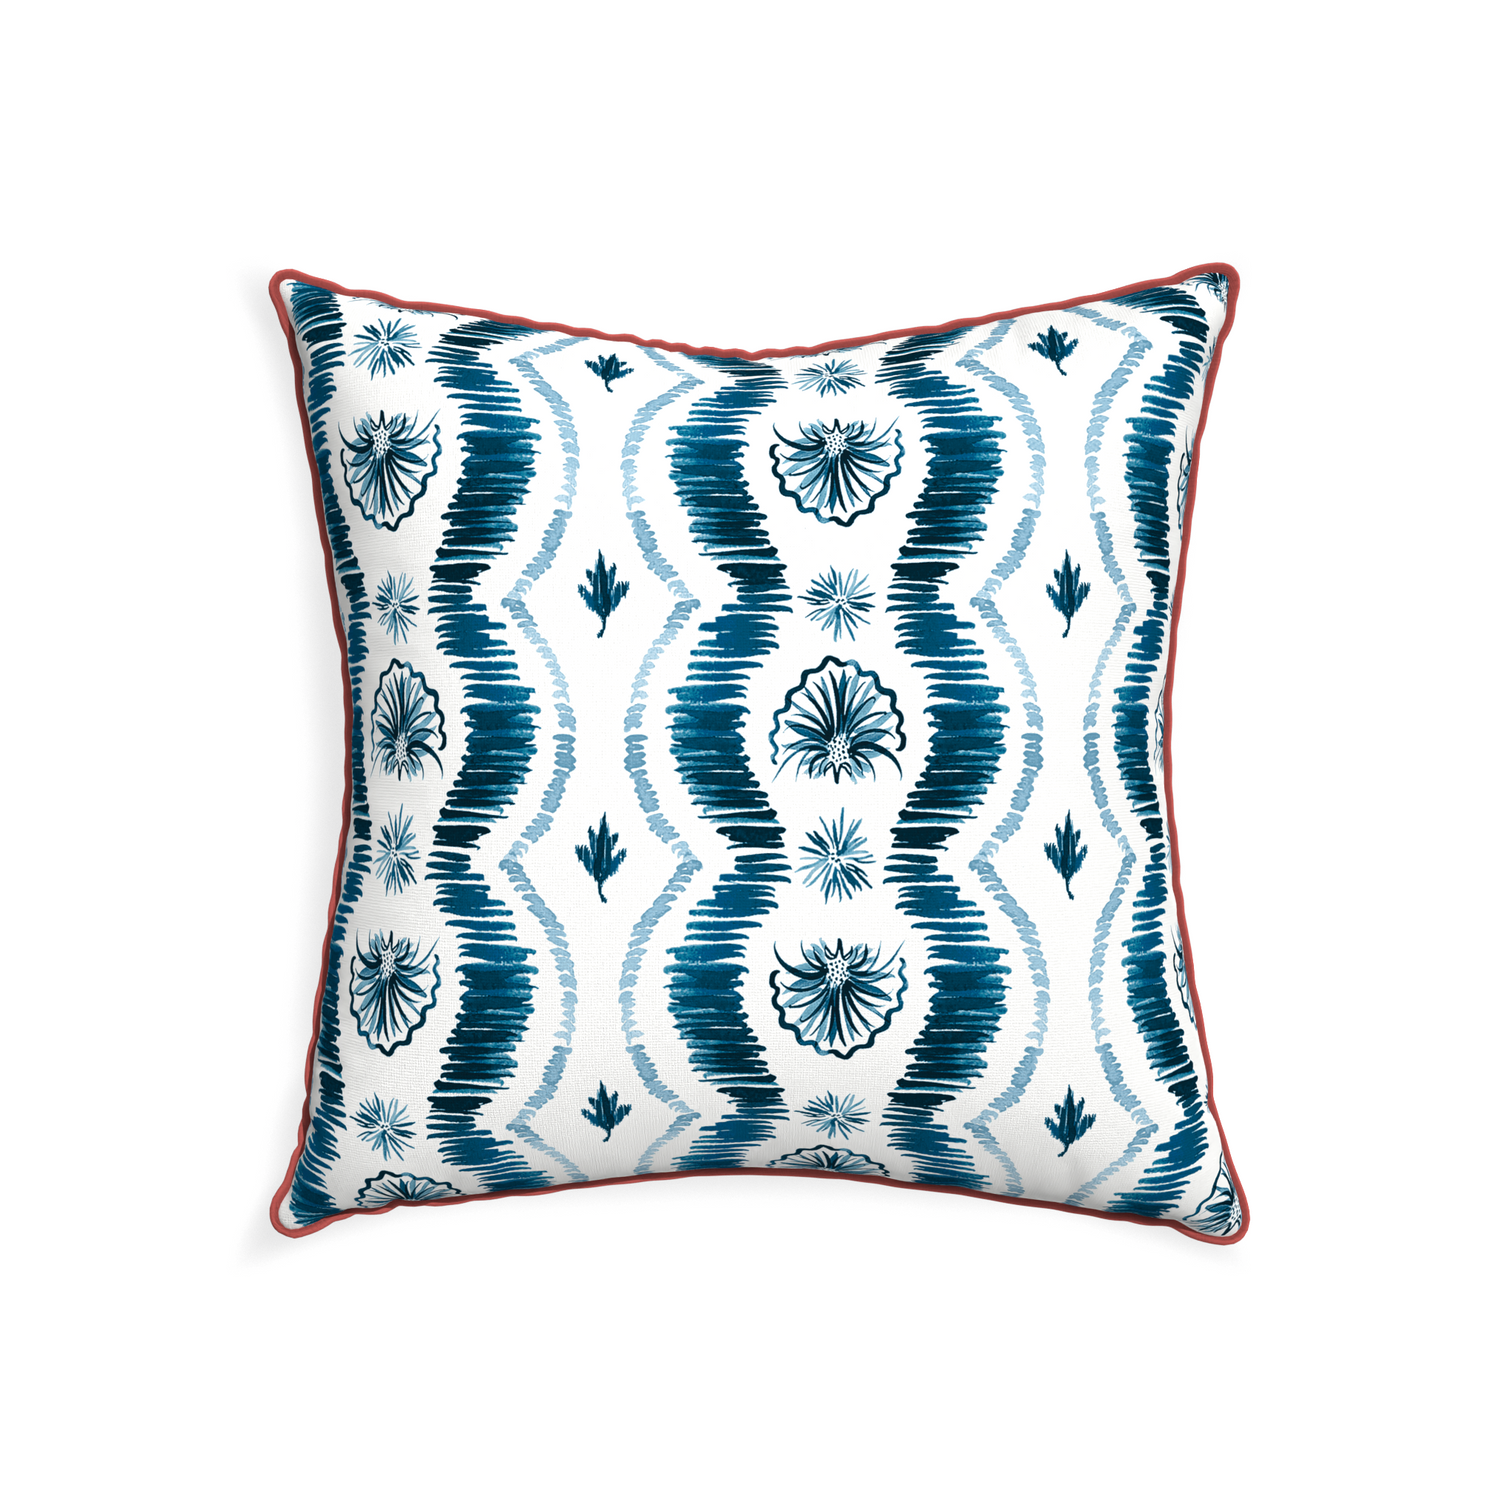 Square Blue Ikat Stripe Pillow with pink velvet piping